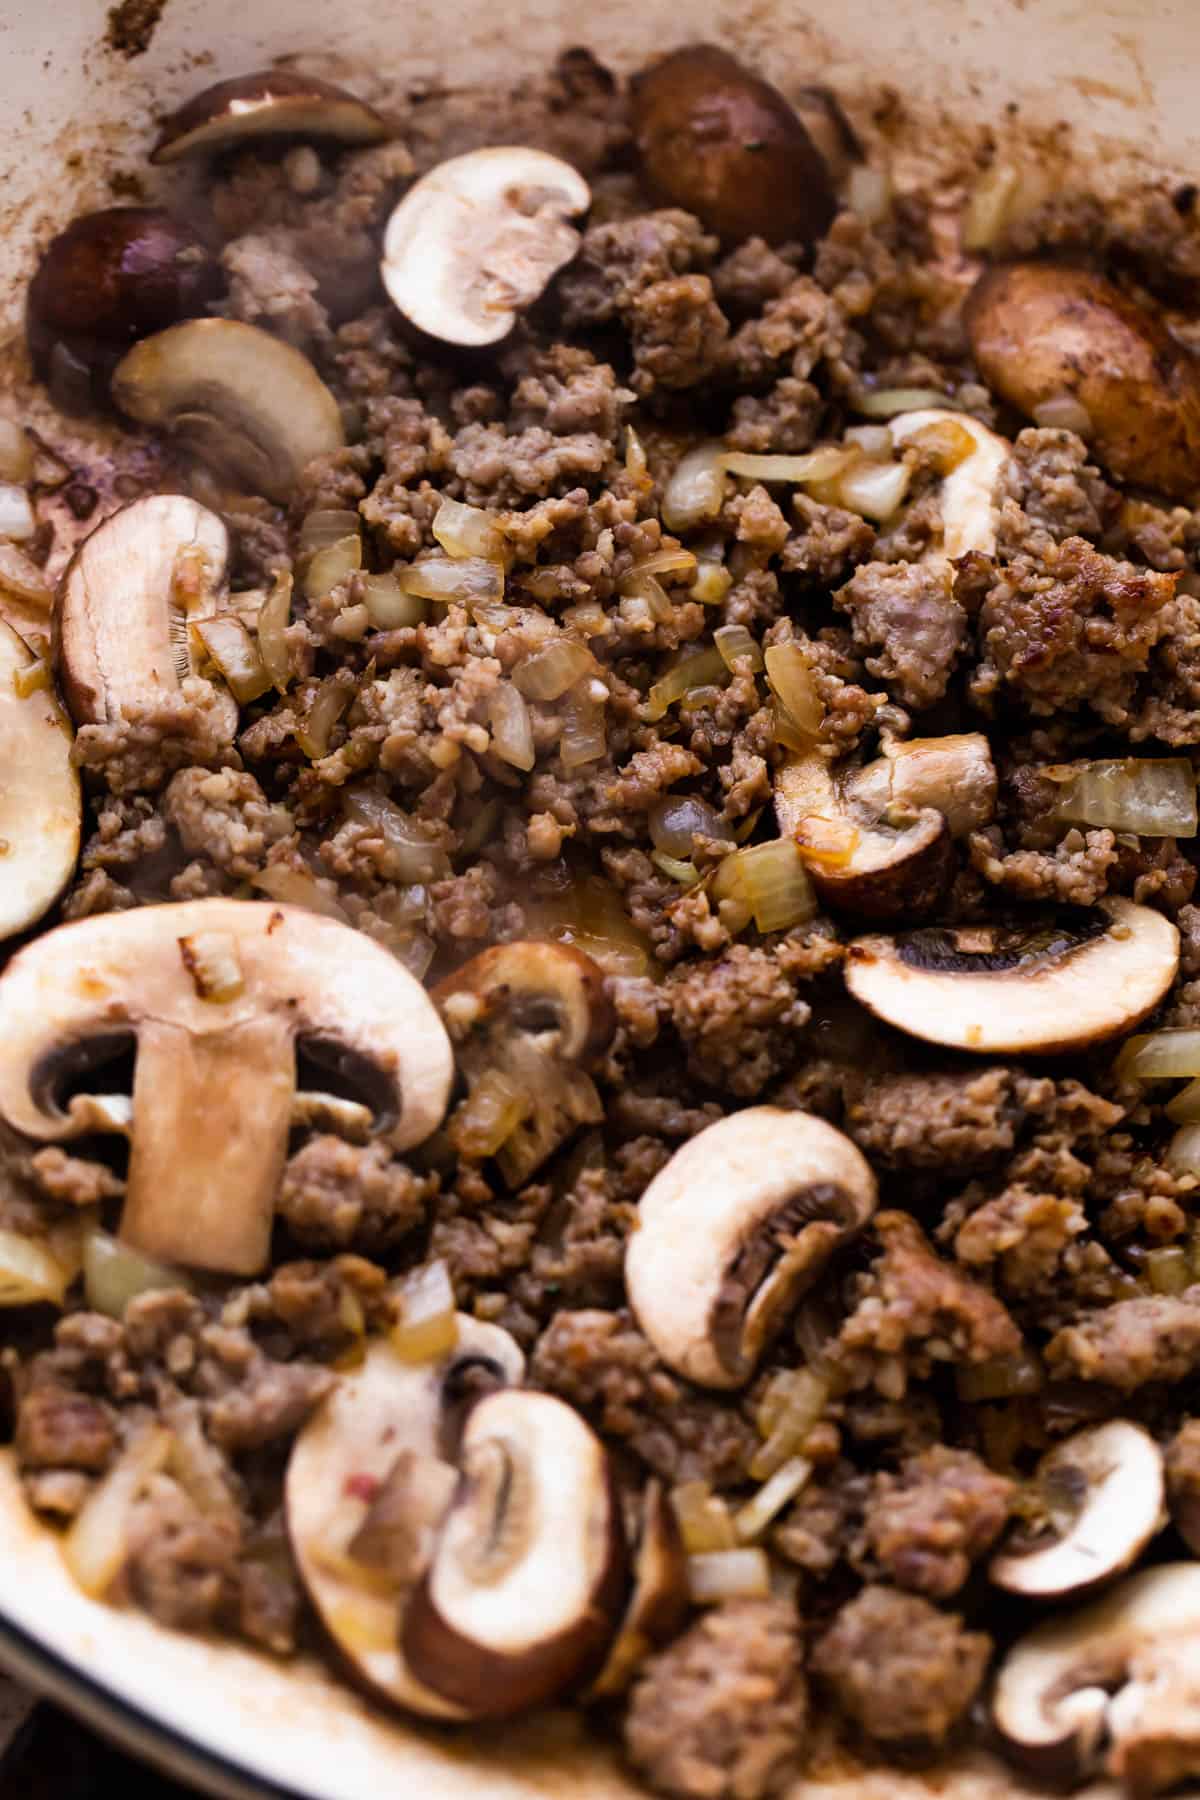 cooking ground beef with mushrooms to make beef stroganoff.